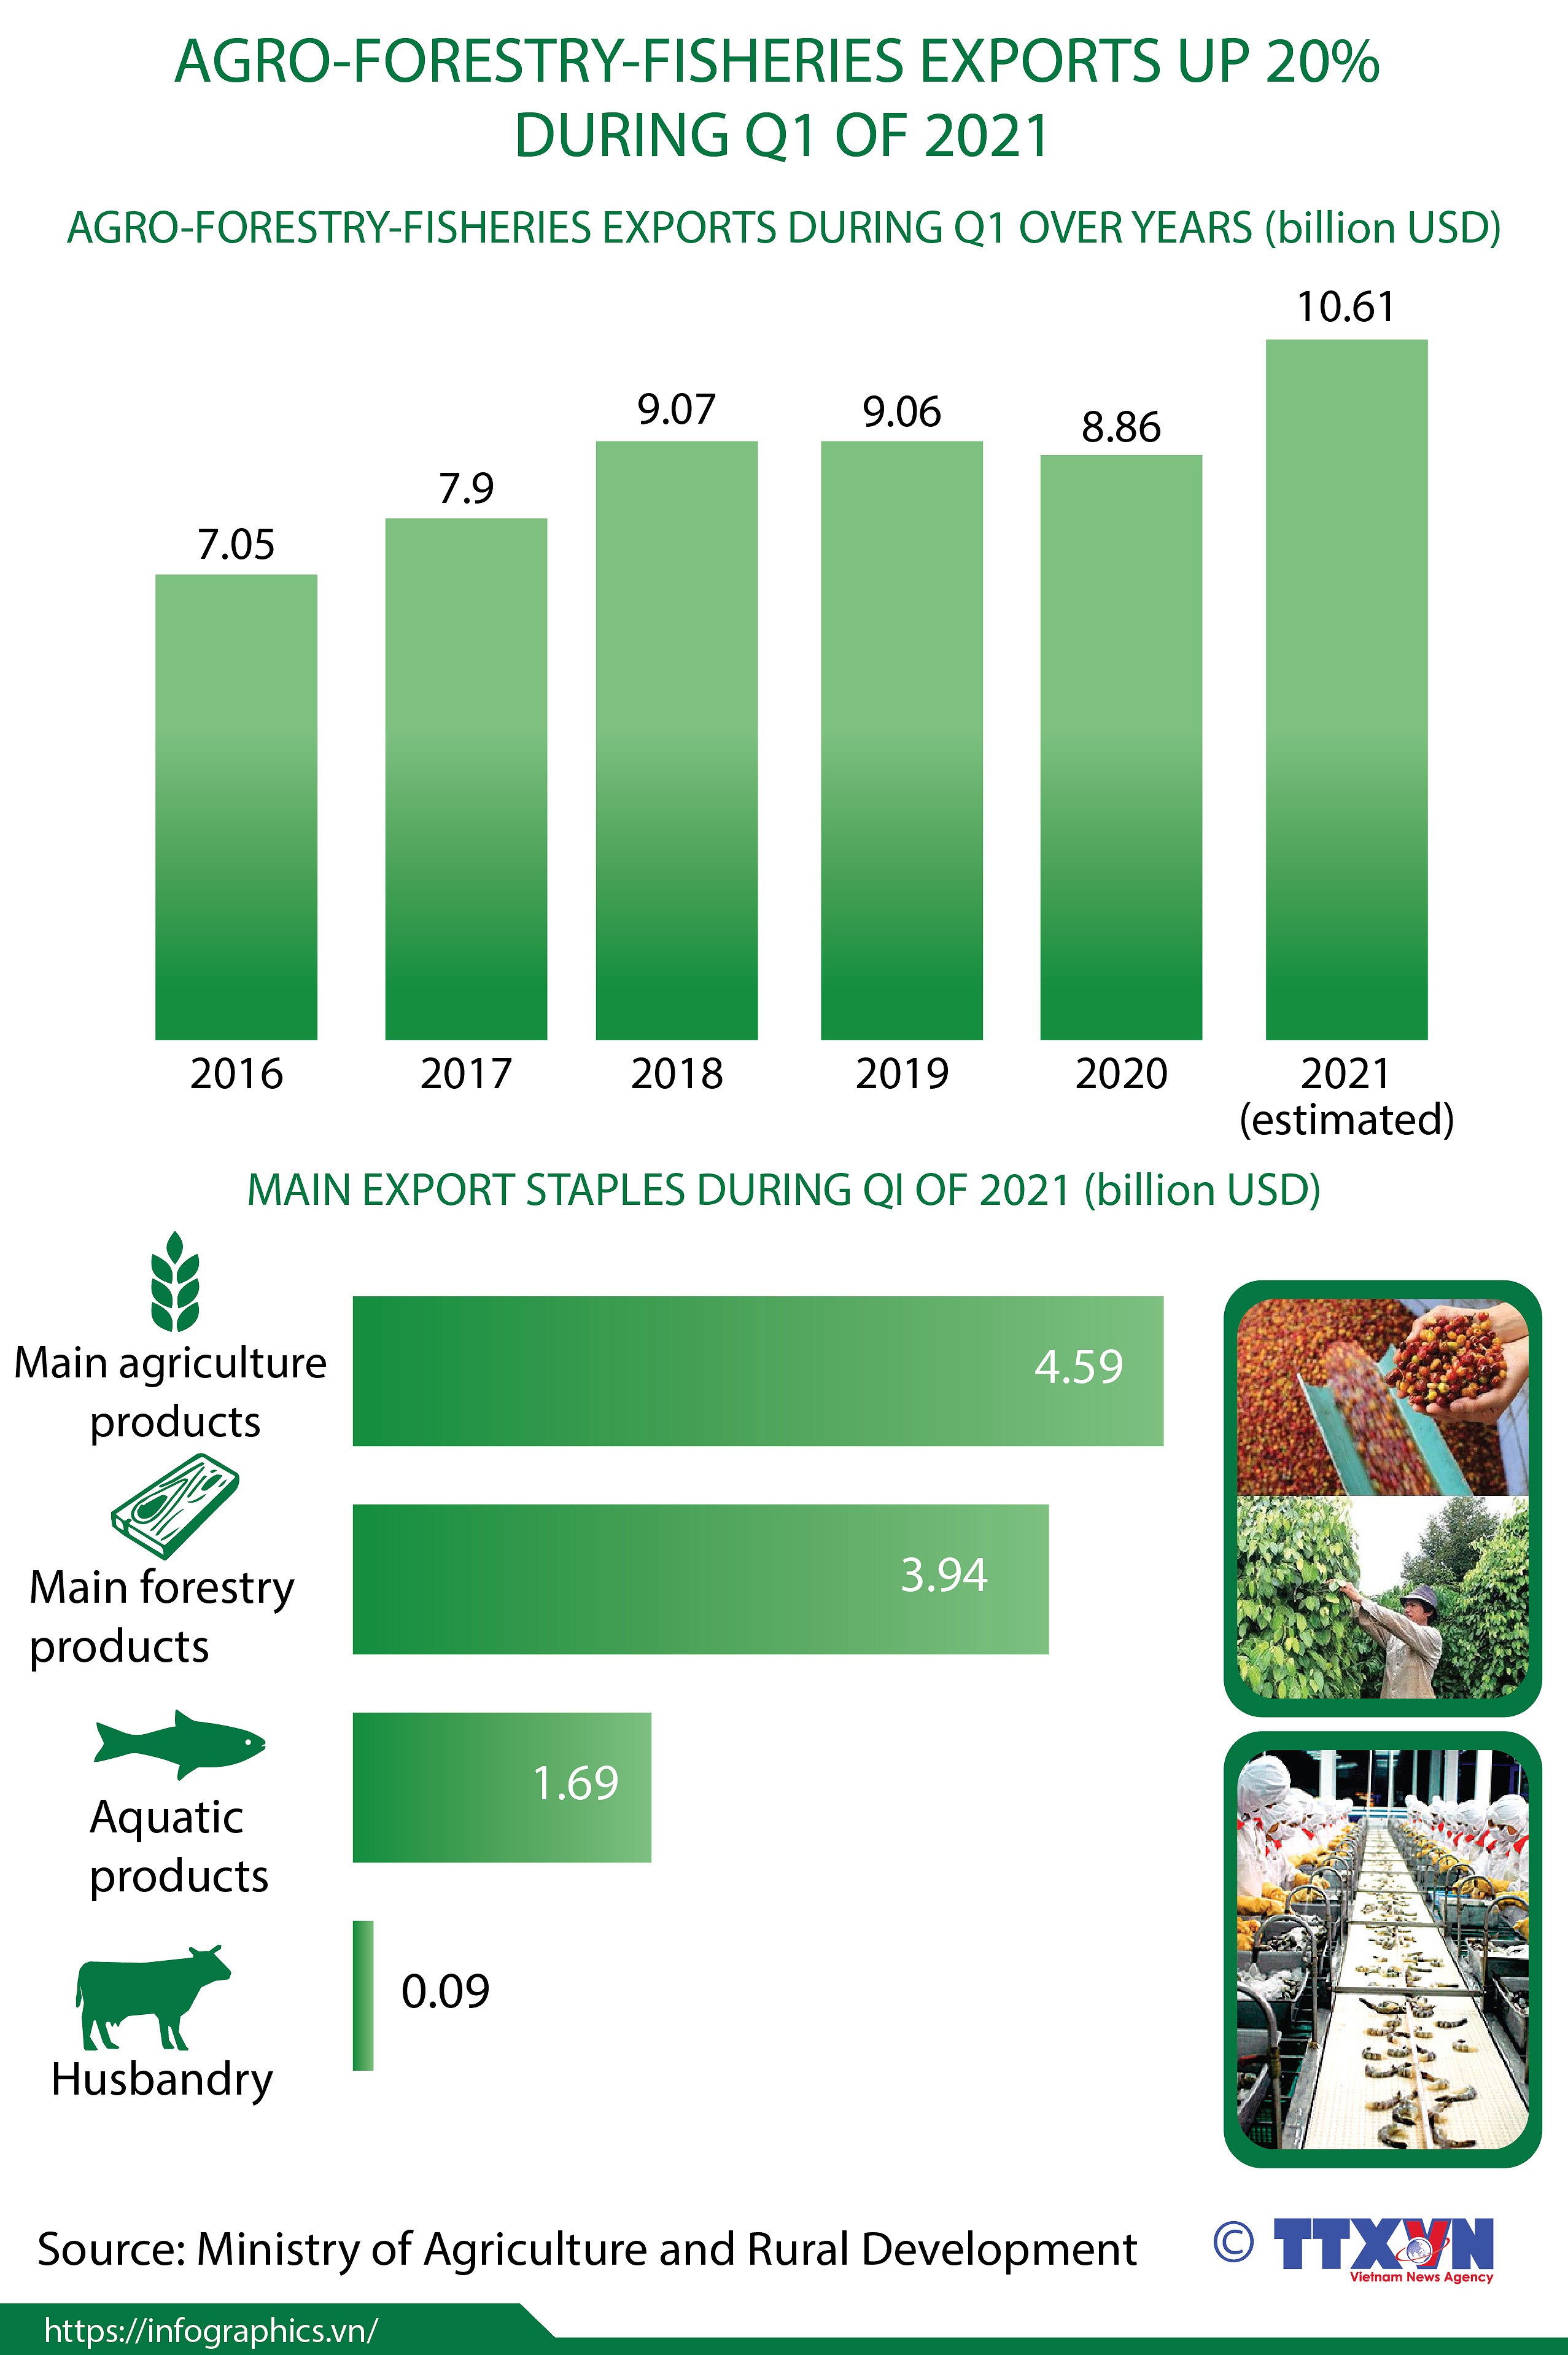 Agro-forestry-fishery exports up 20% during Q1 hinh anh 1